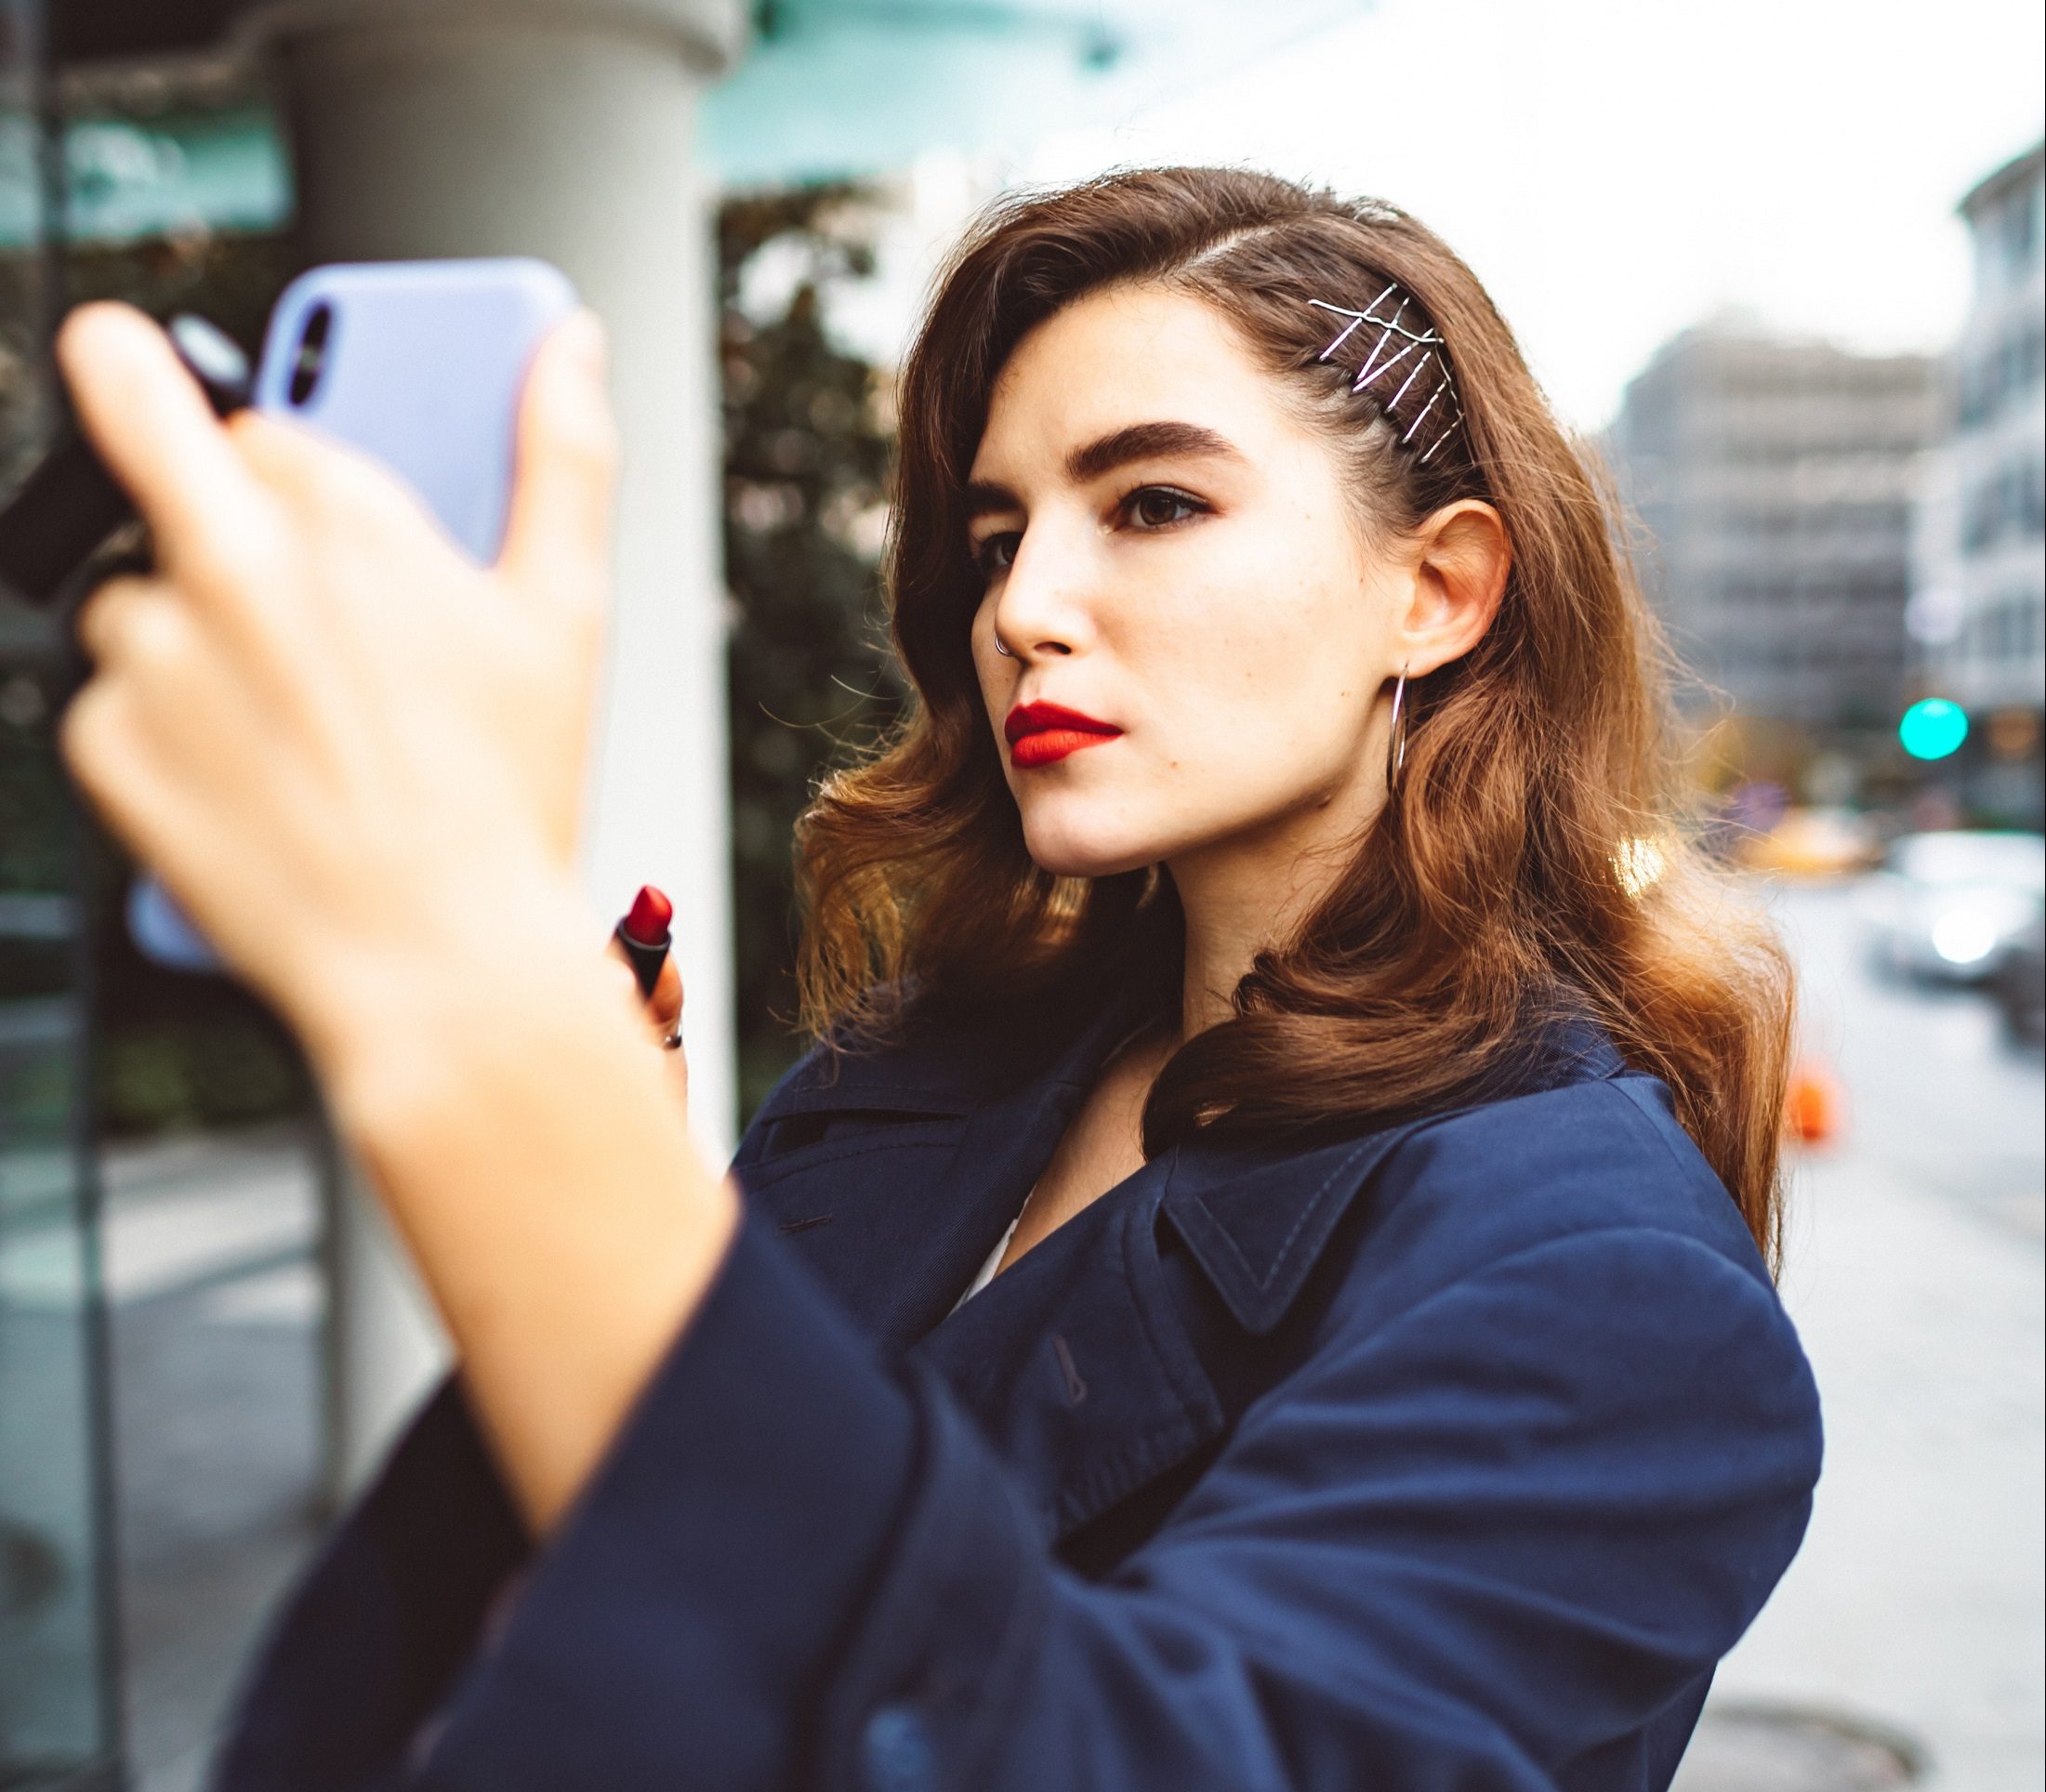 How do you create the perfect selfie? Here are some tips from a photographer